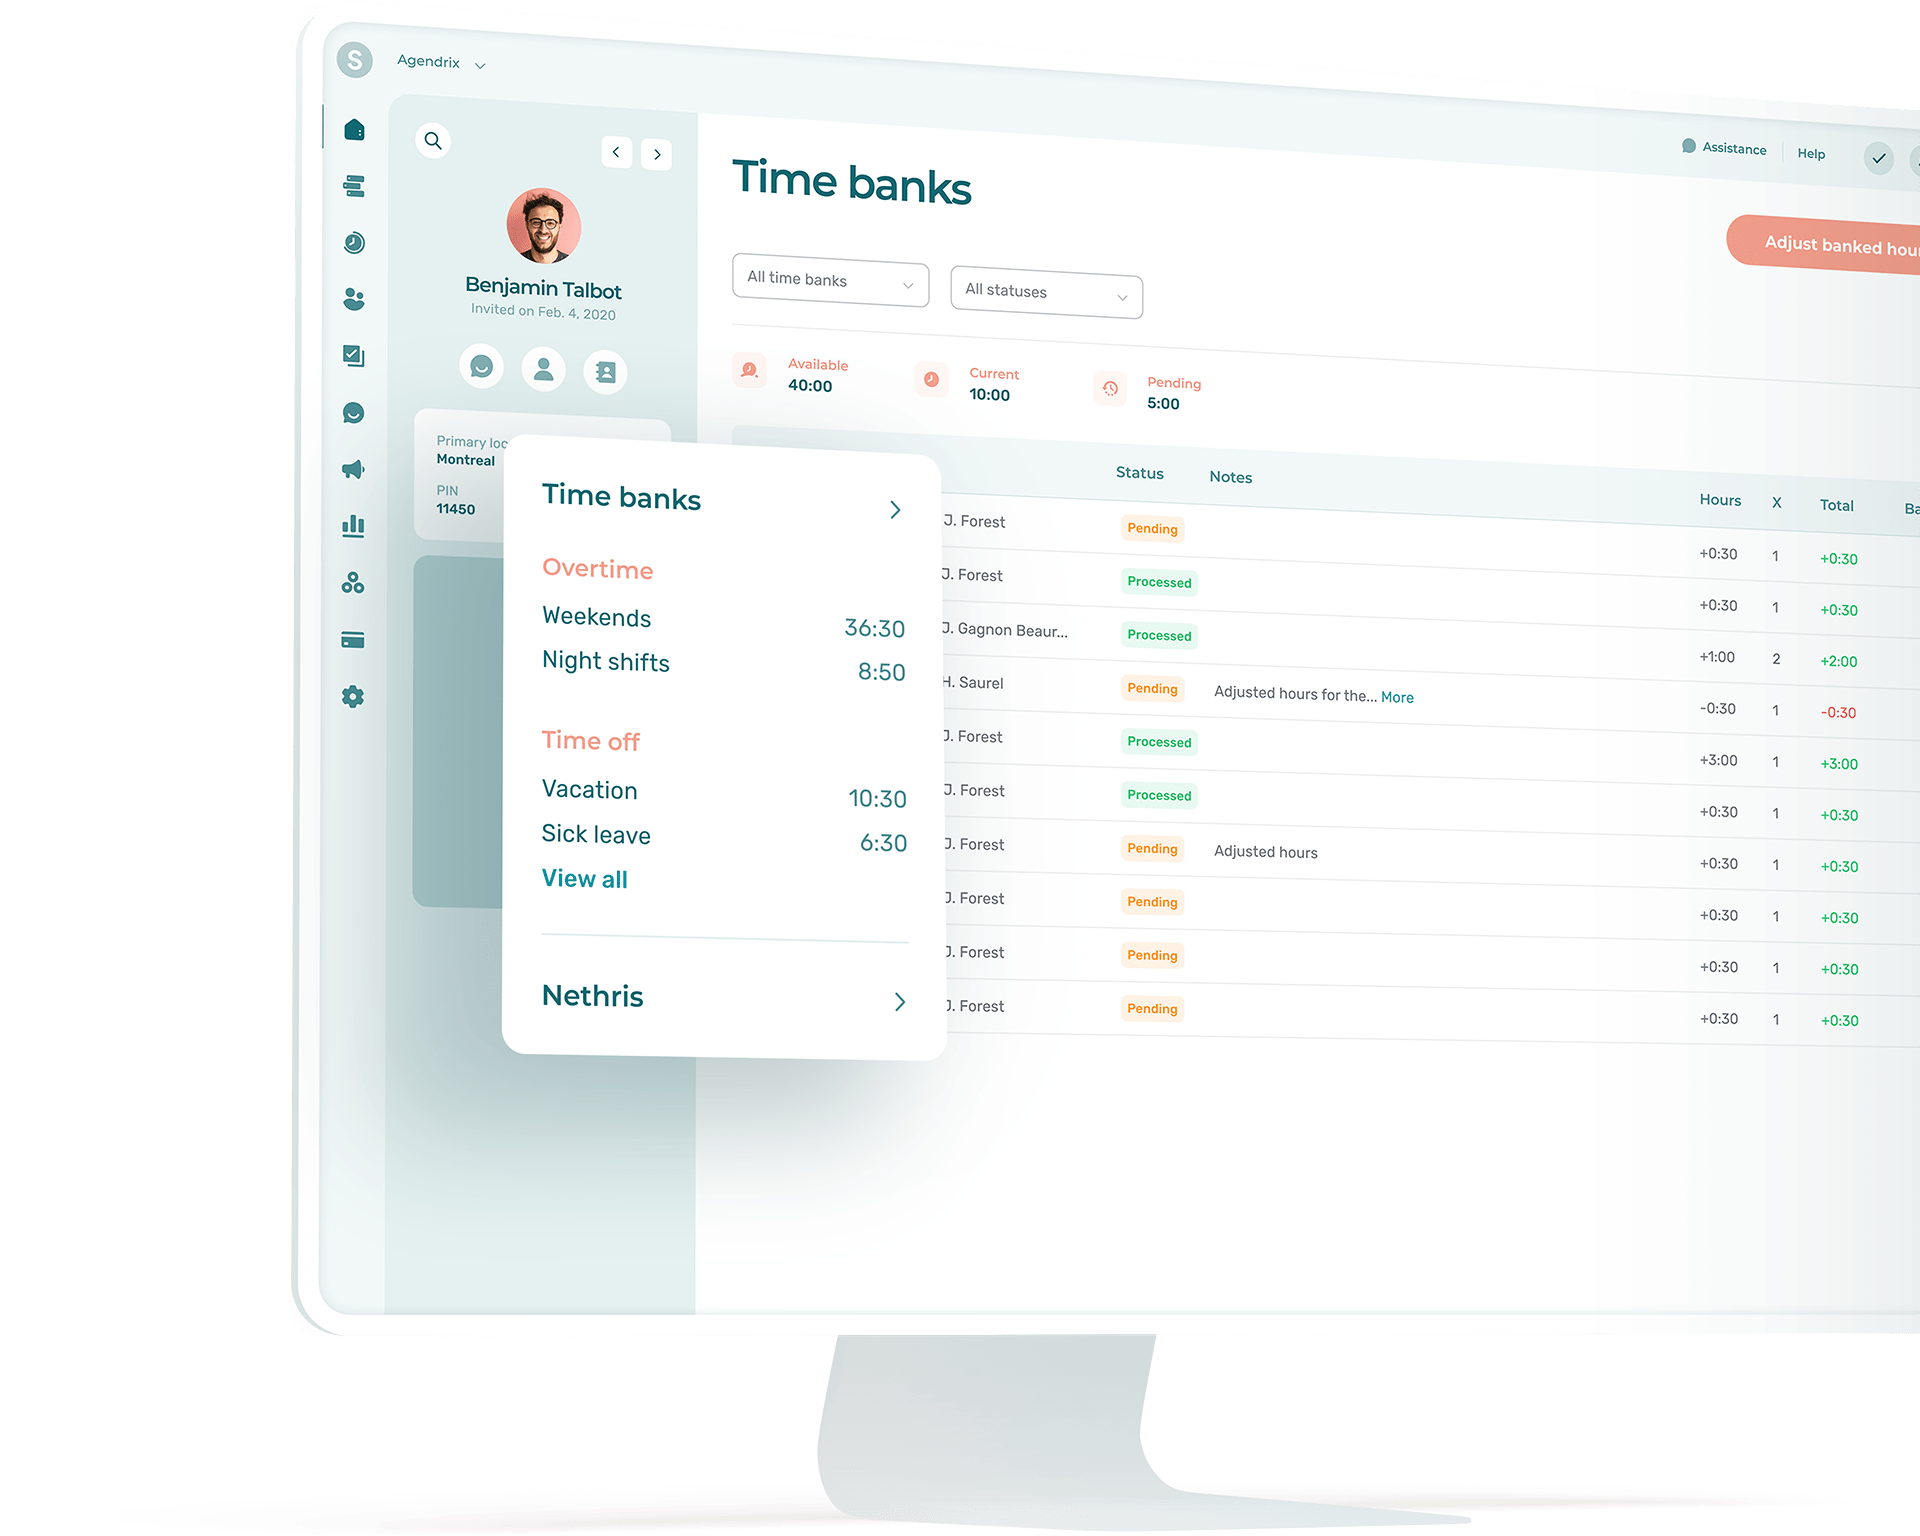 Software interface representing Time banks to track overtime, PTO, and leaves in a business